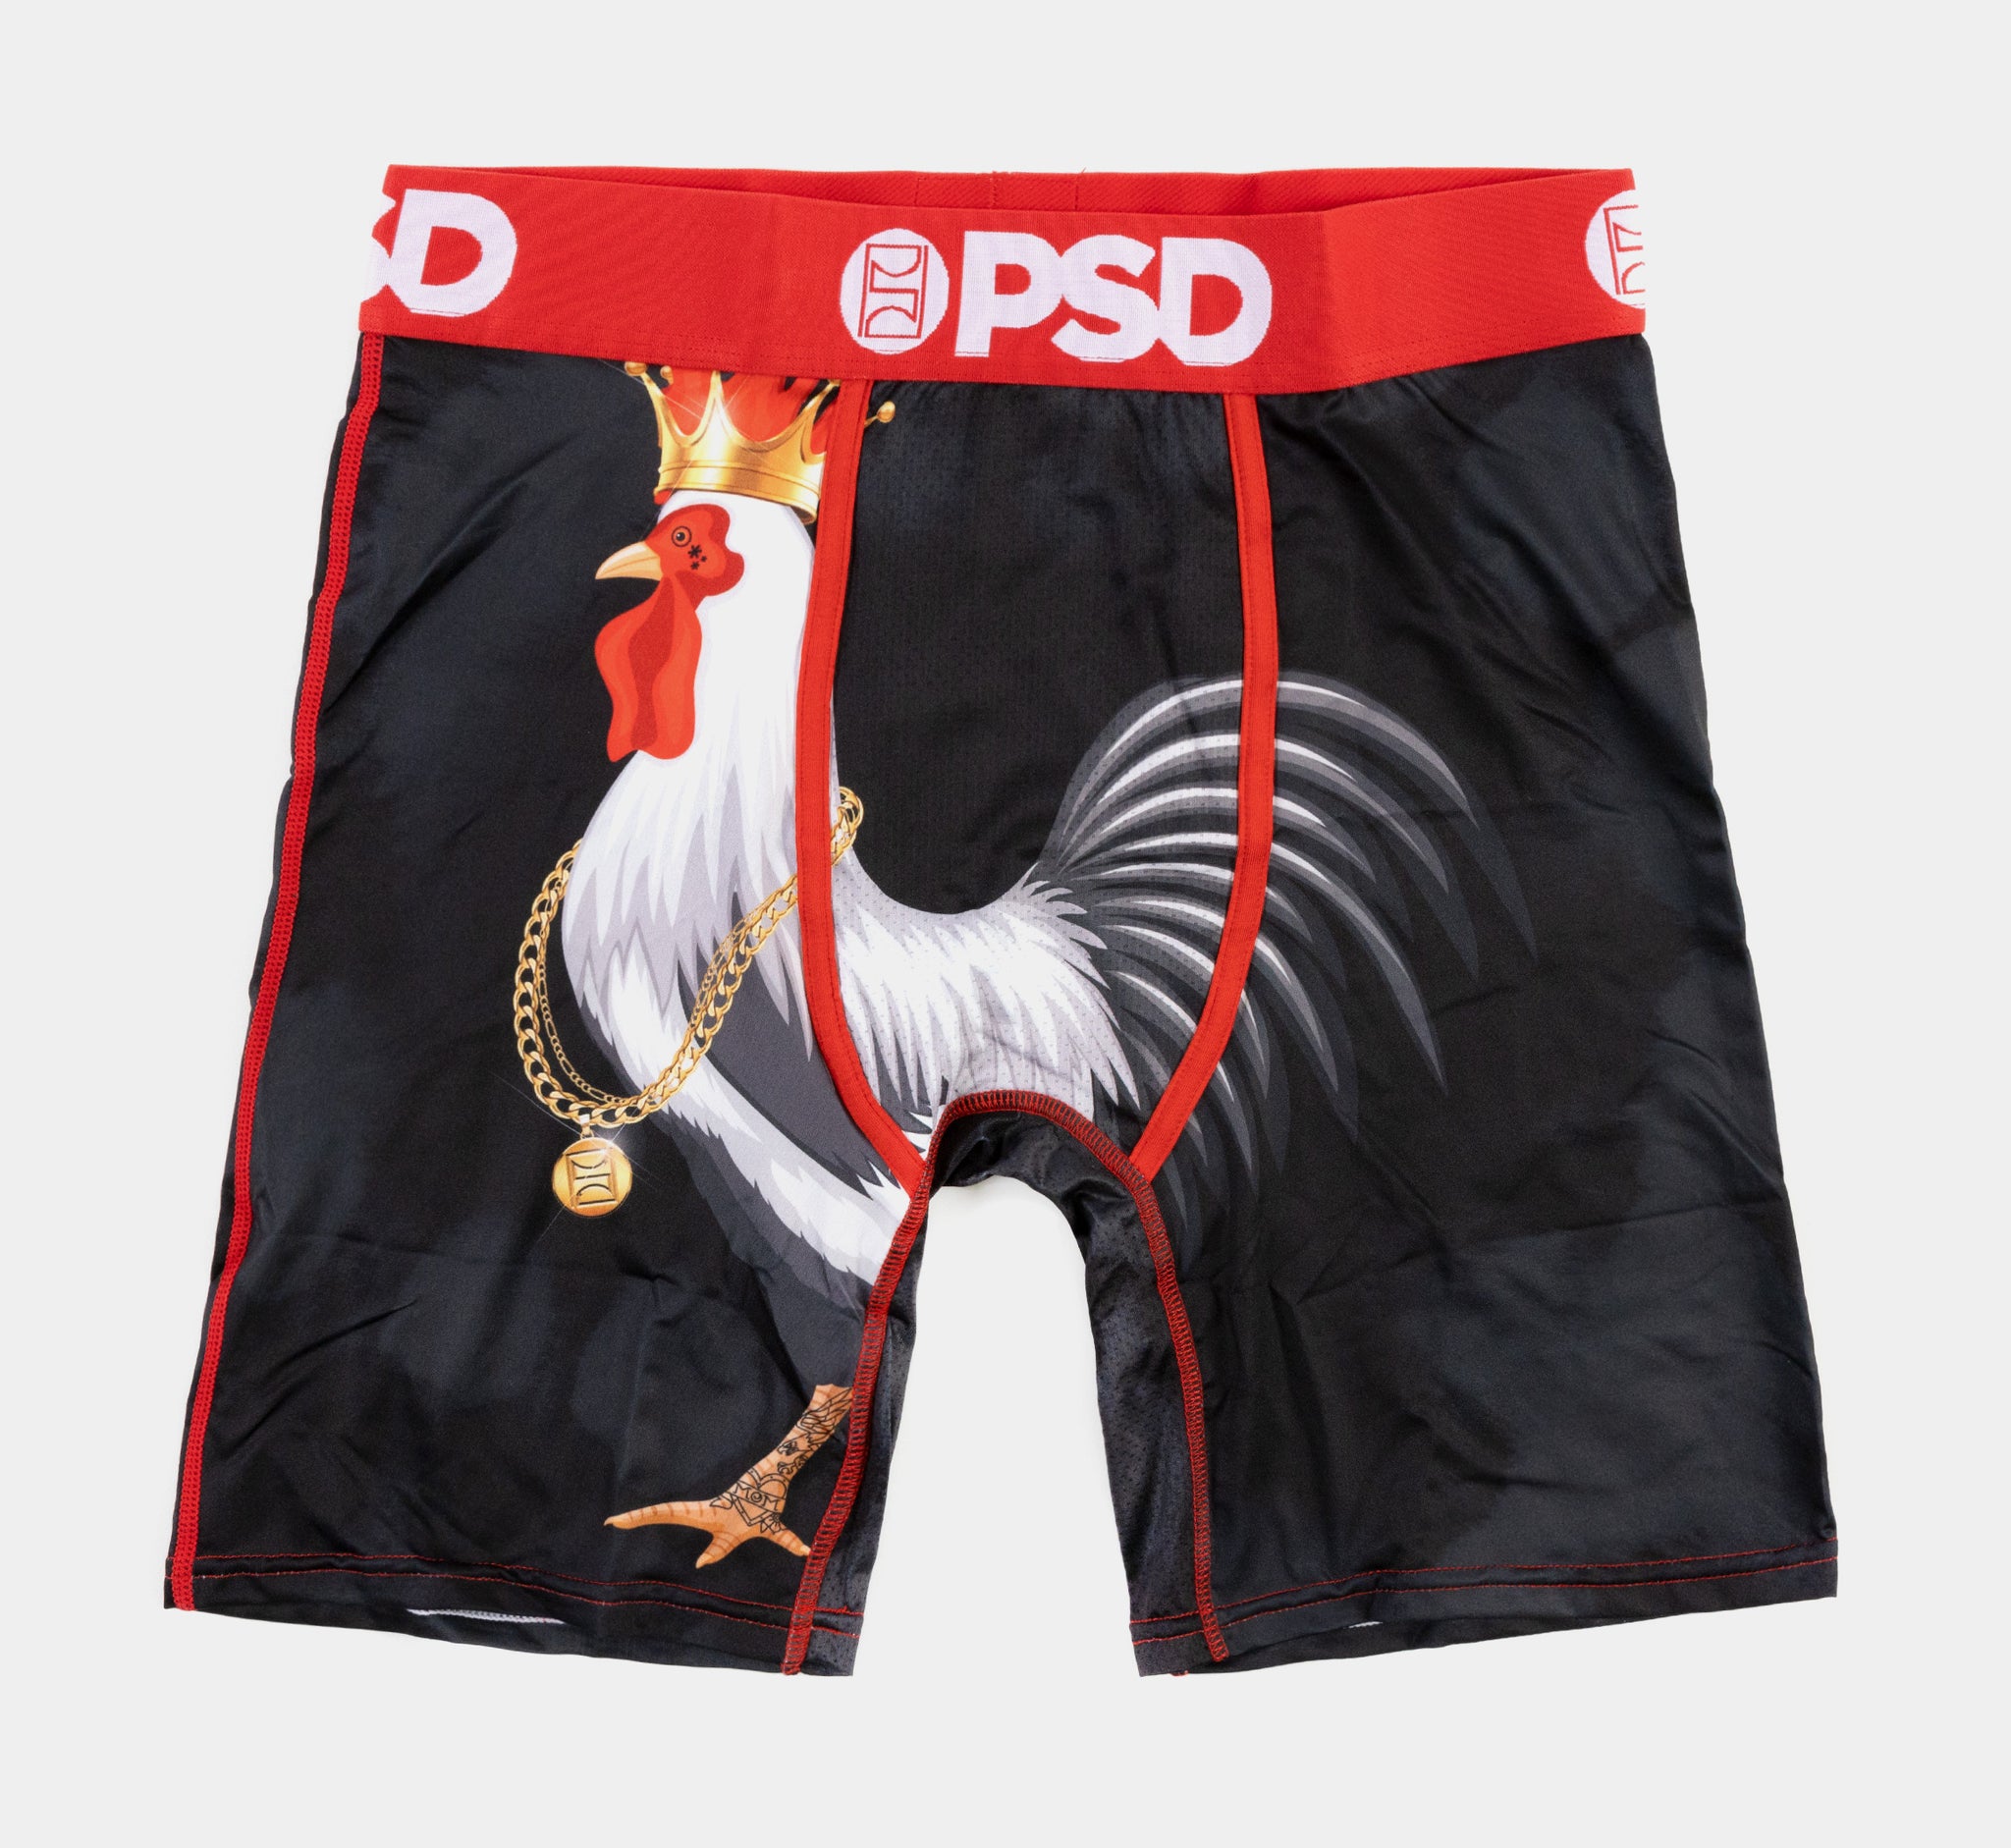 Psd Cocky Mens Boxer Black Red Free Shipping 323180187 – Shoe Palace